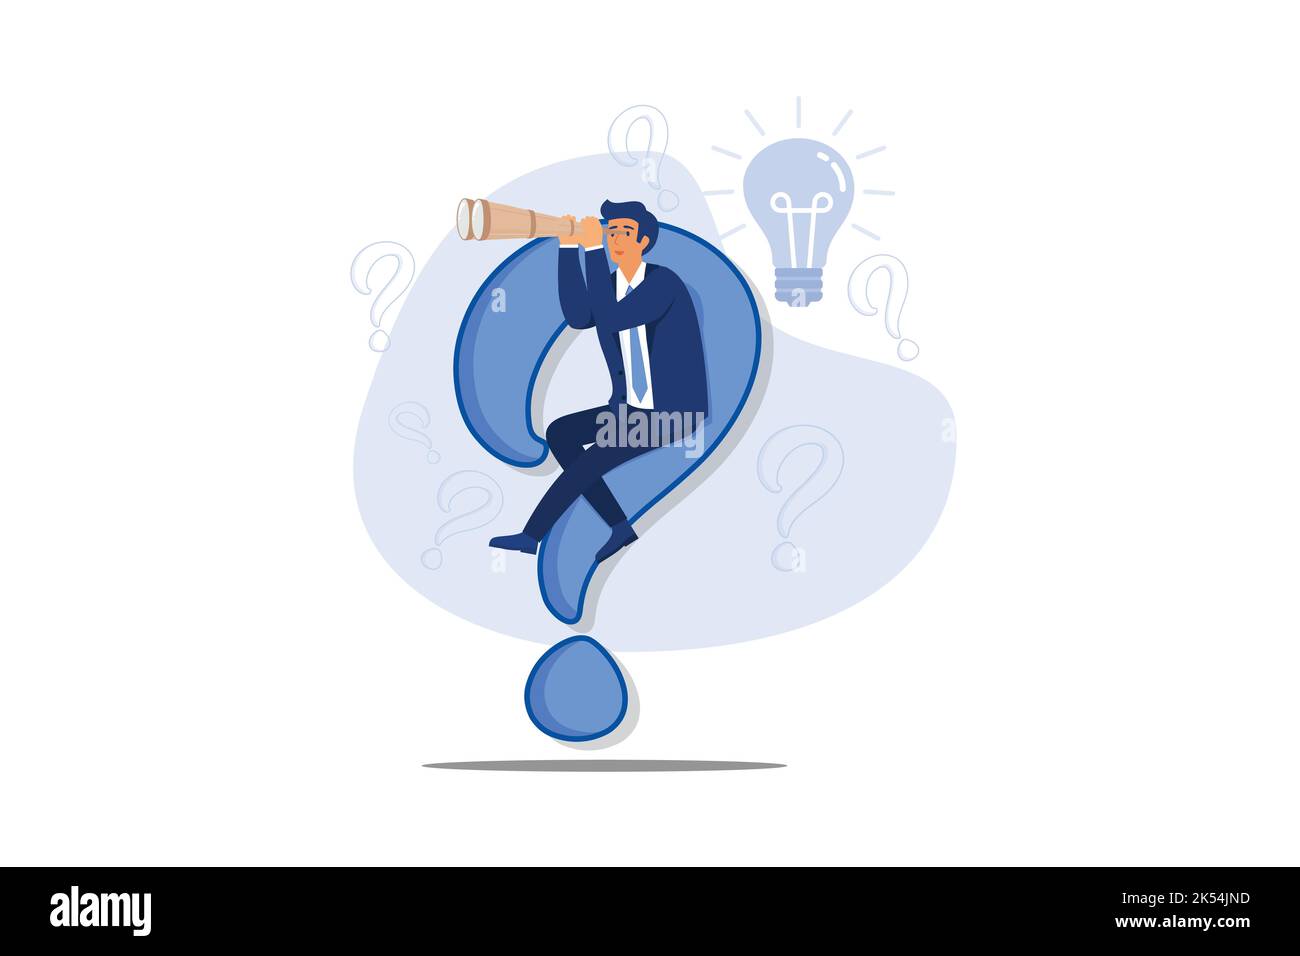 Curiosity explore unknown, curios businessman with huge question mark look through binoculars to search for new business idea. flat design modern illu Stock Vector